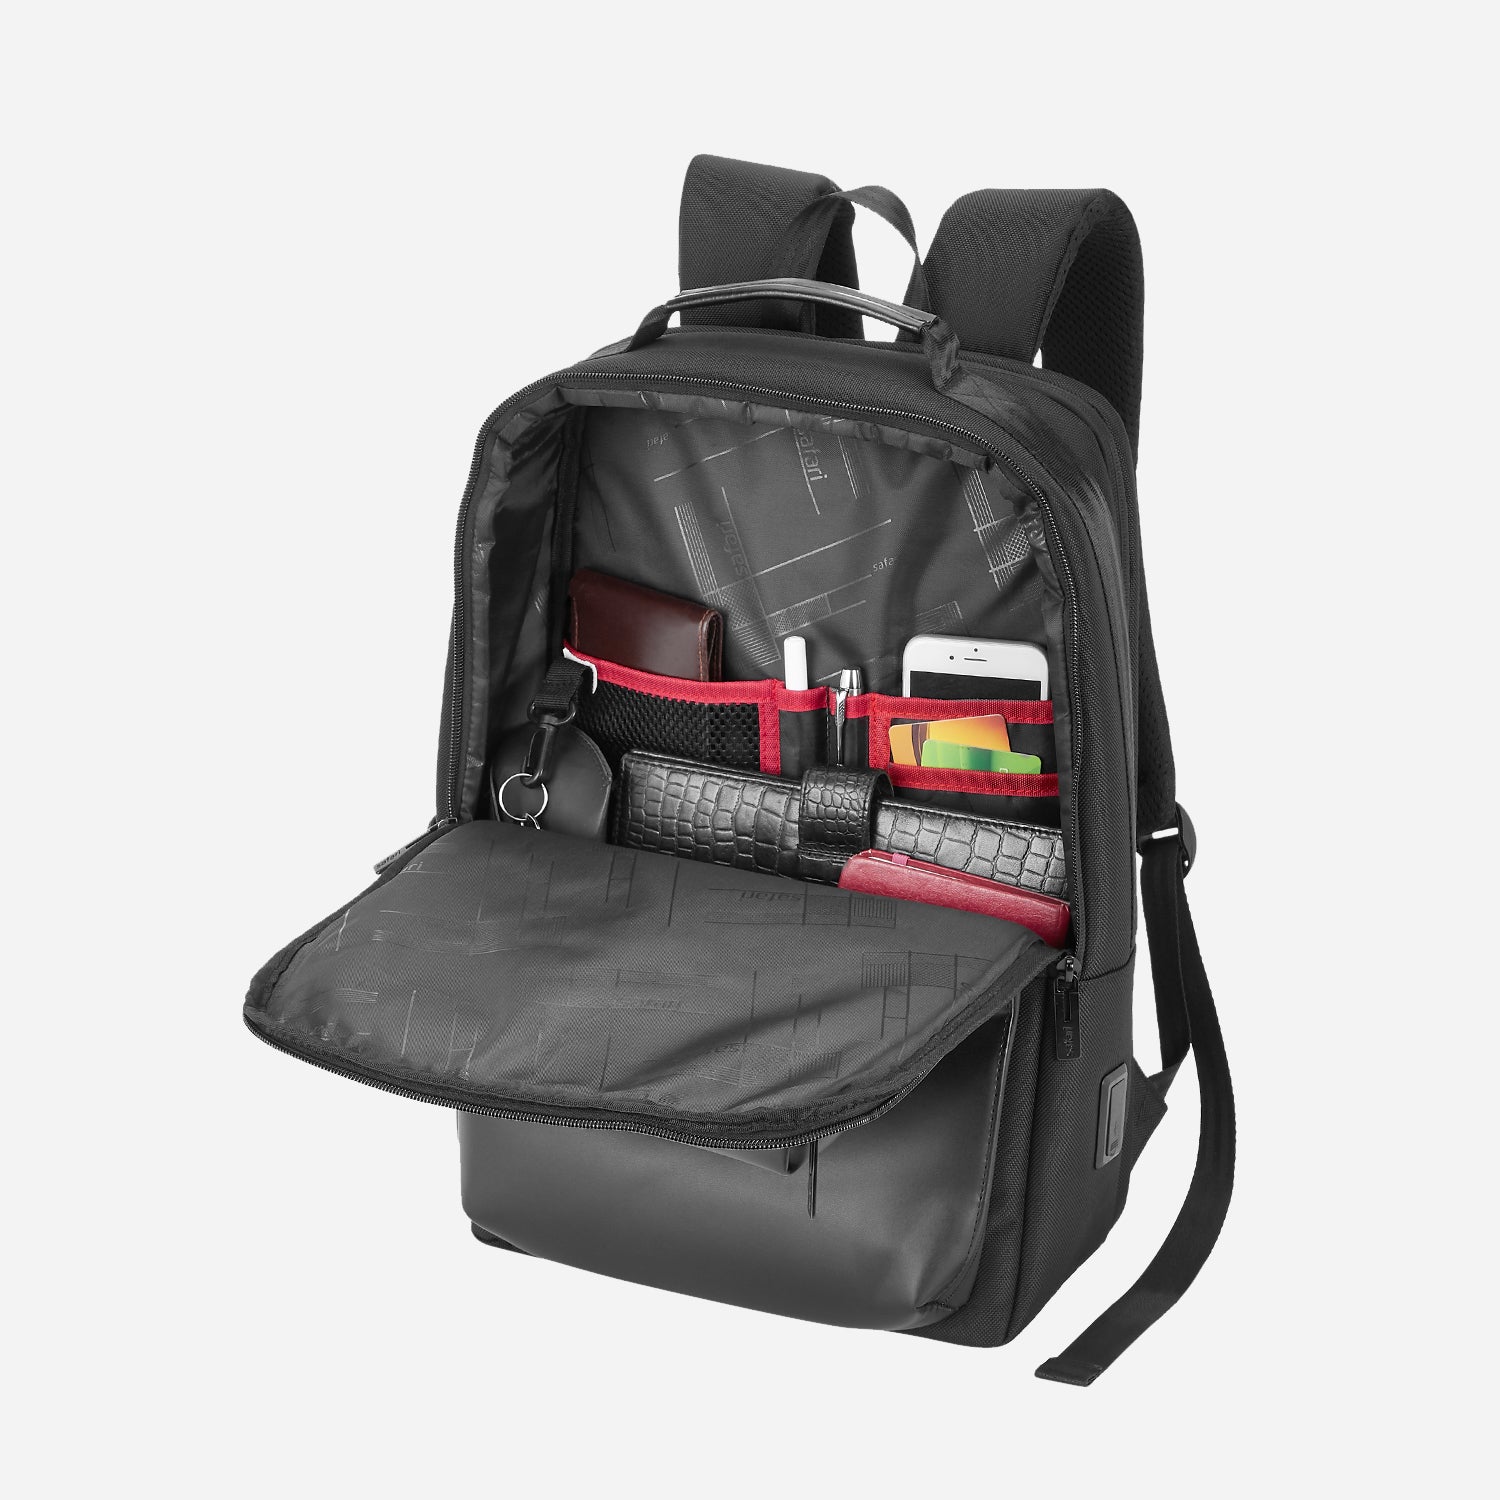 Ritz Formal Backpack with USB Port , Hidden Pockets and Trolley Sleeve- Black